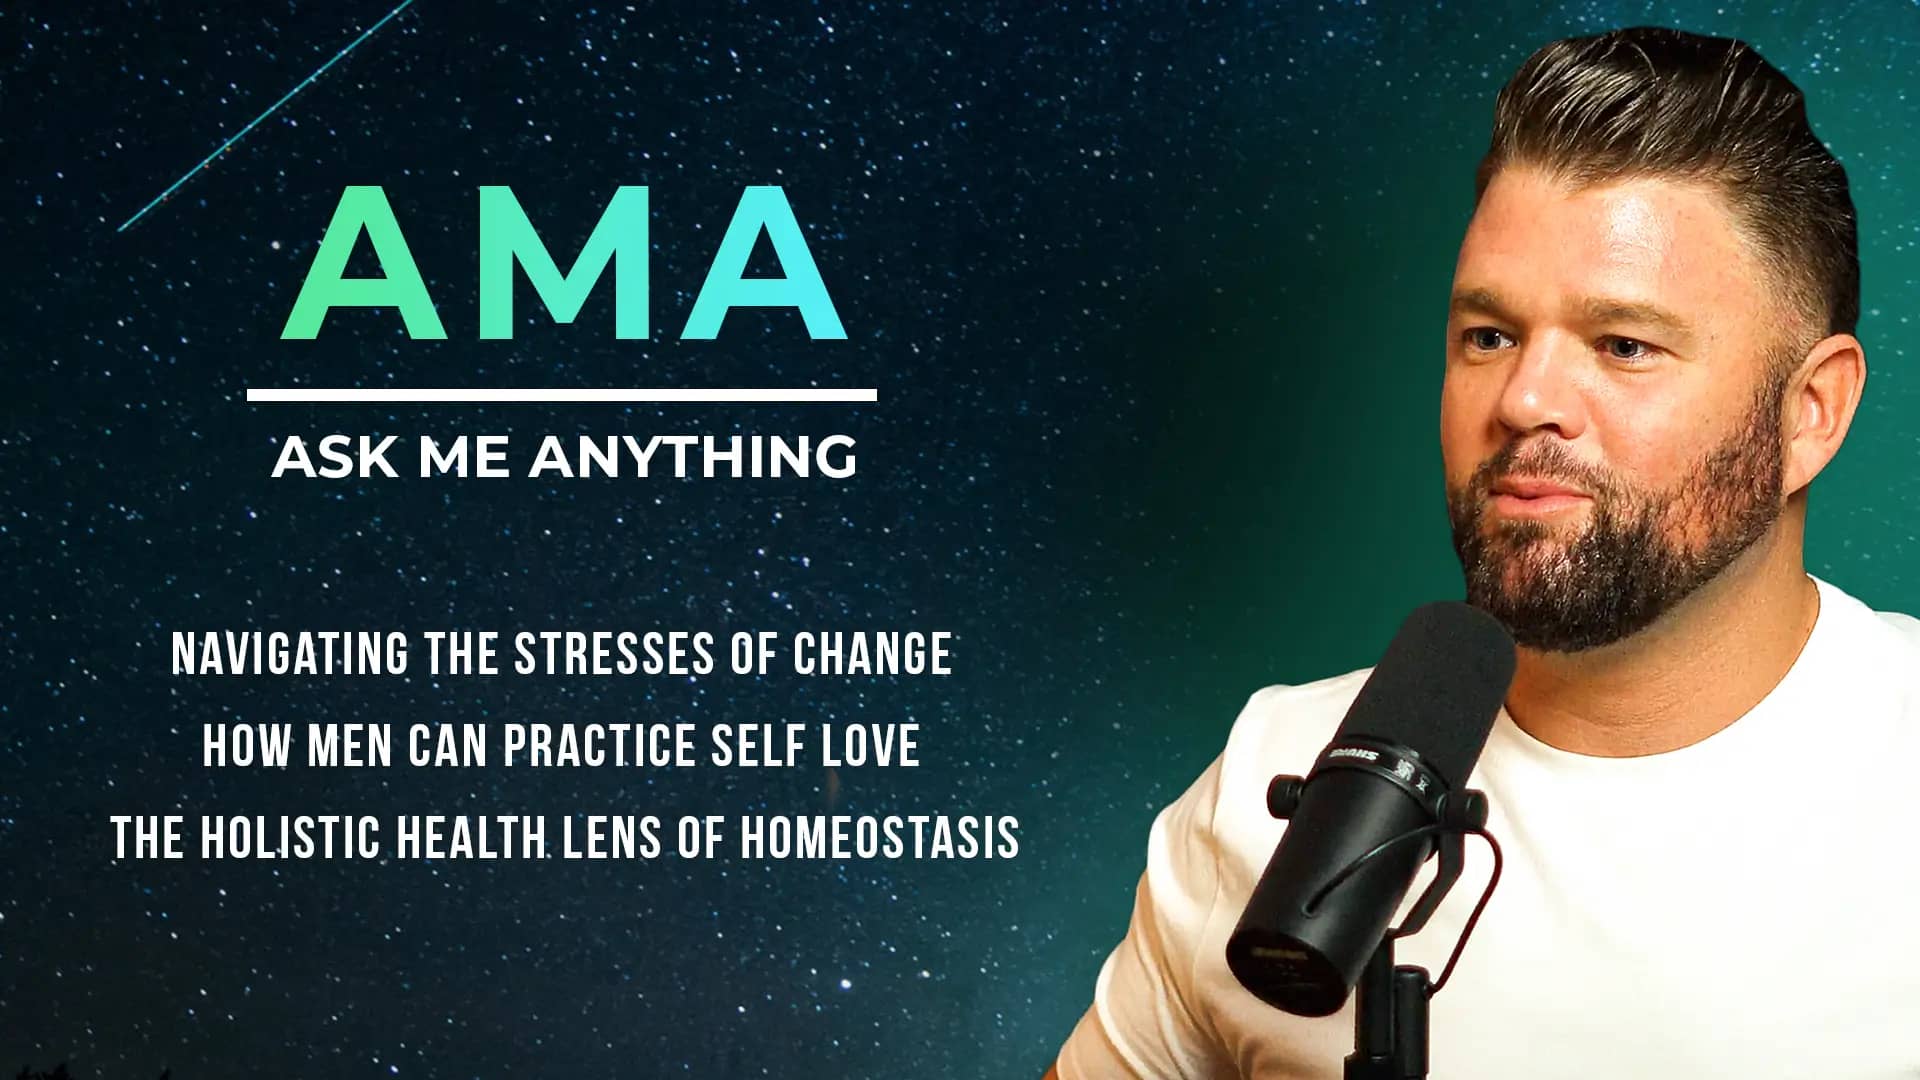 AMA: Navigating The Stresses of Change, How Men Can Practice Self Love + The Holistic Health Lens of Homeostasis